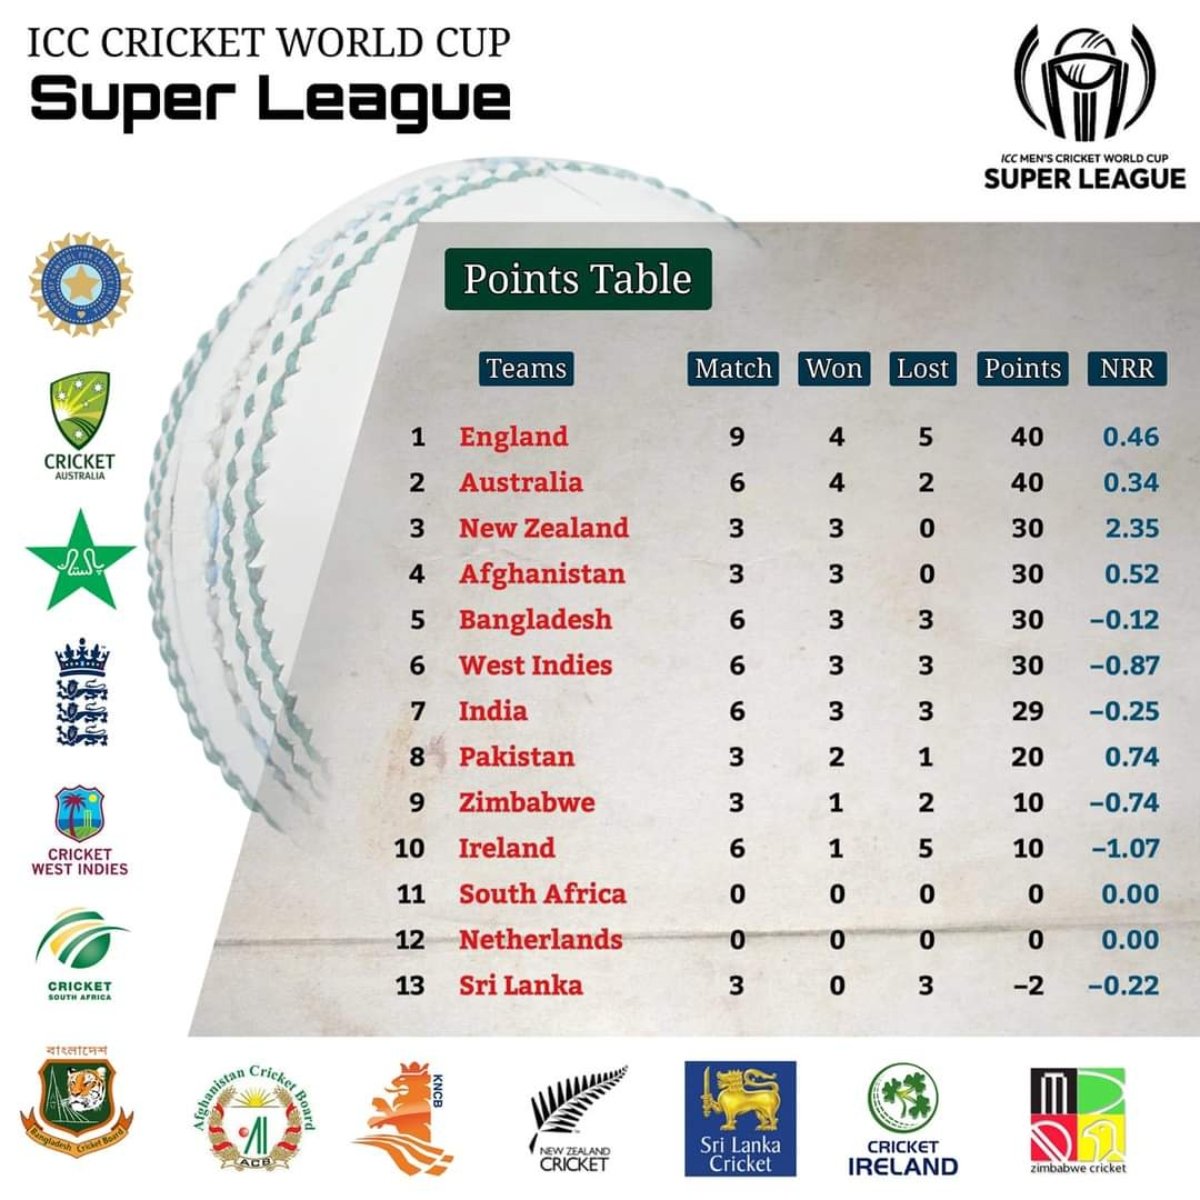 India goes ahead against Pakistan in ICC CWC Super League points table